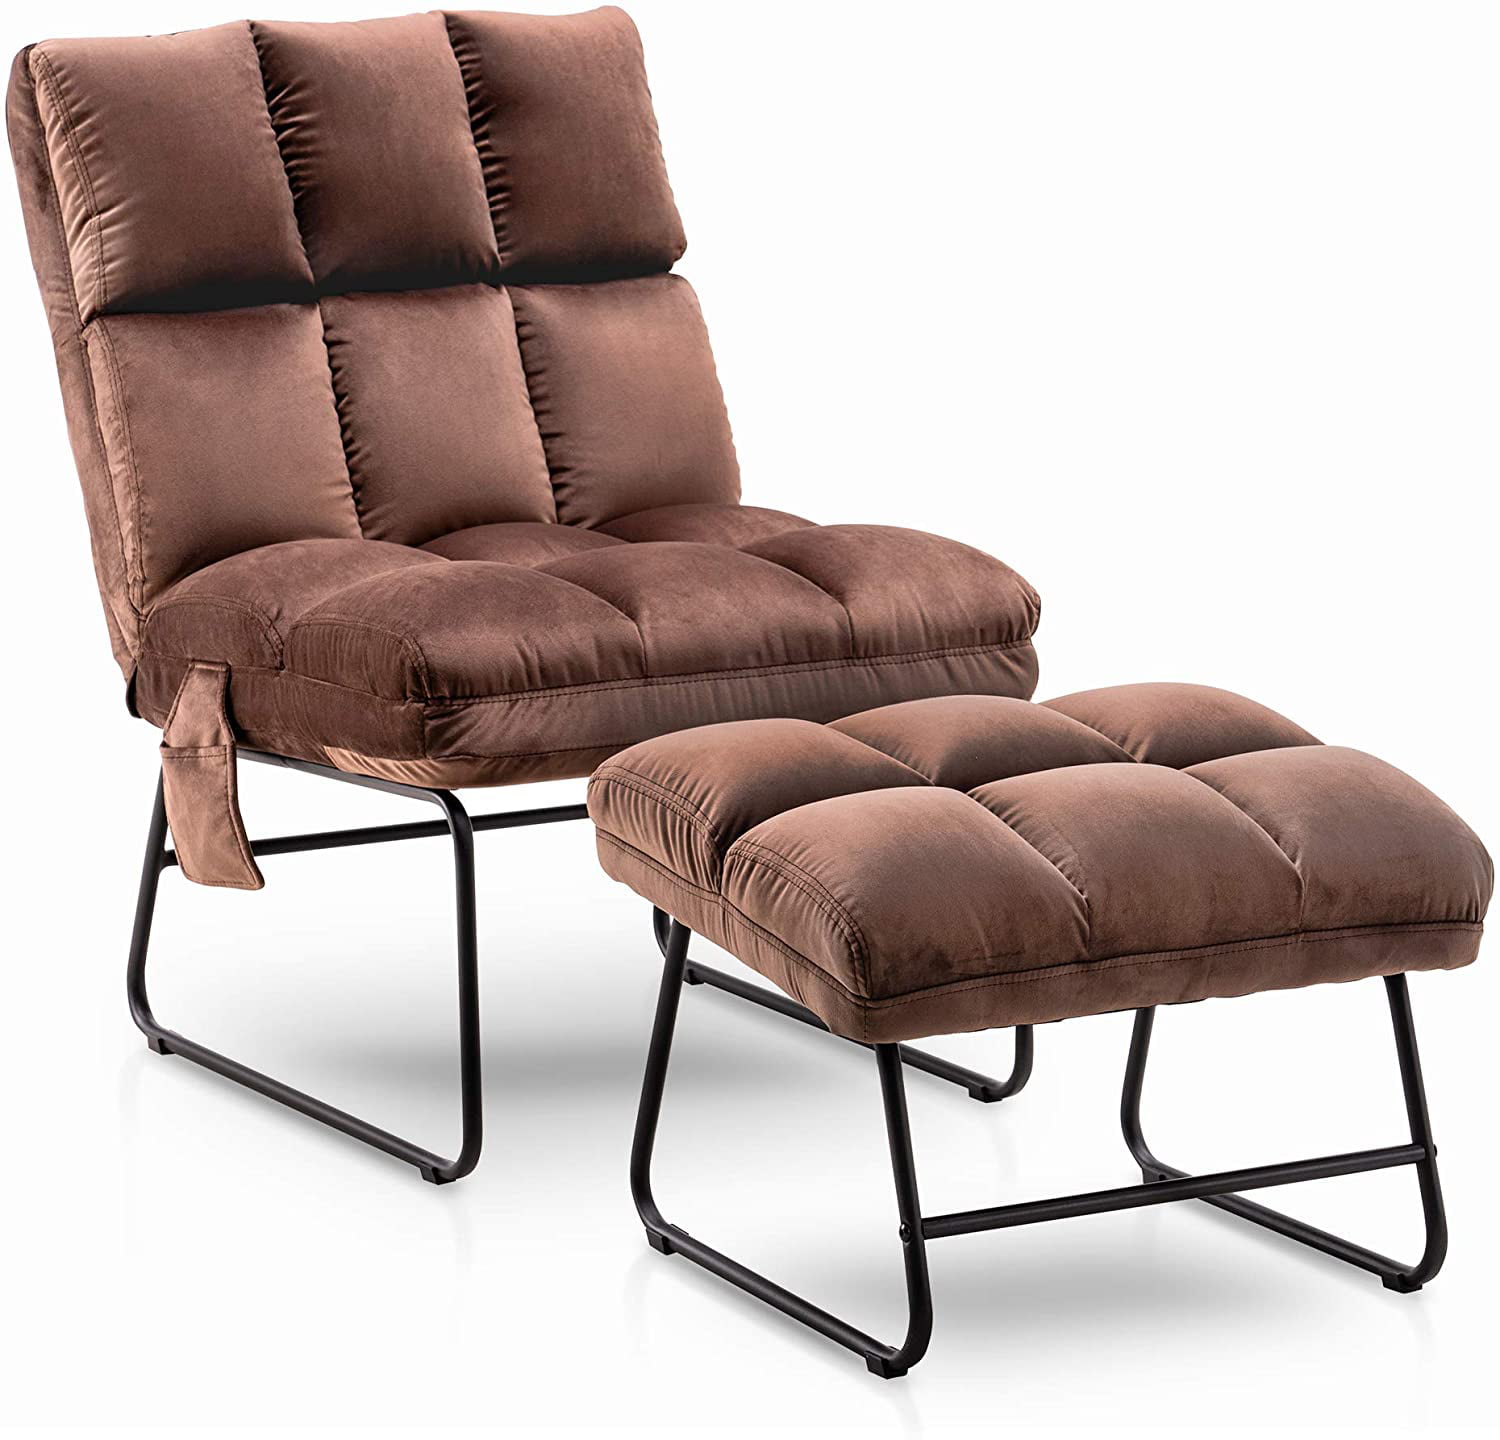 Mcombo Accent Chair With Ottoman, Modern Leather Lounge Chair And Ottoman Bed